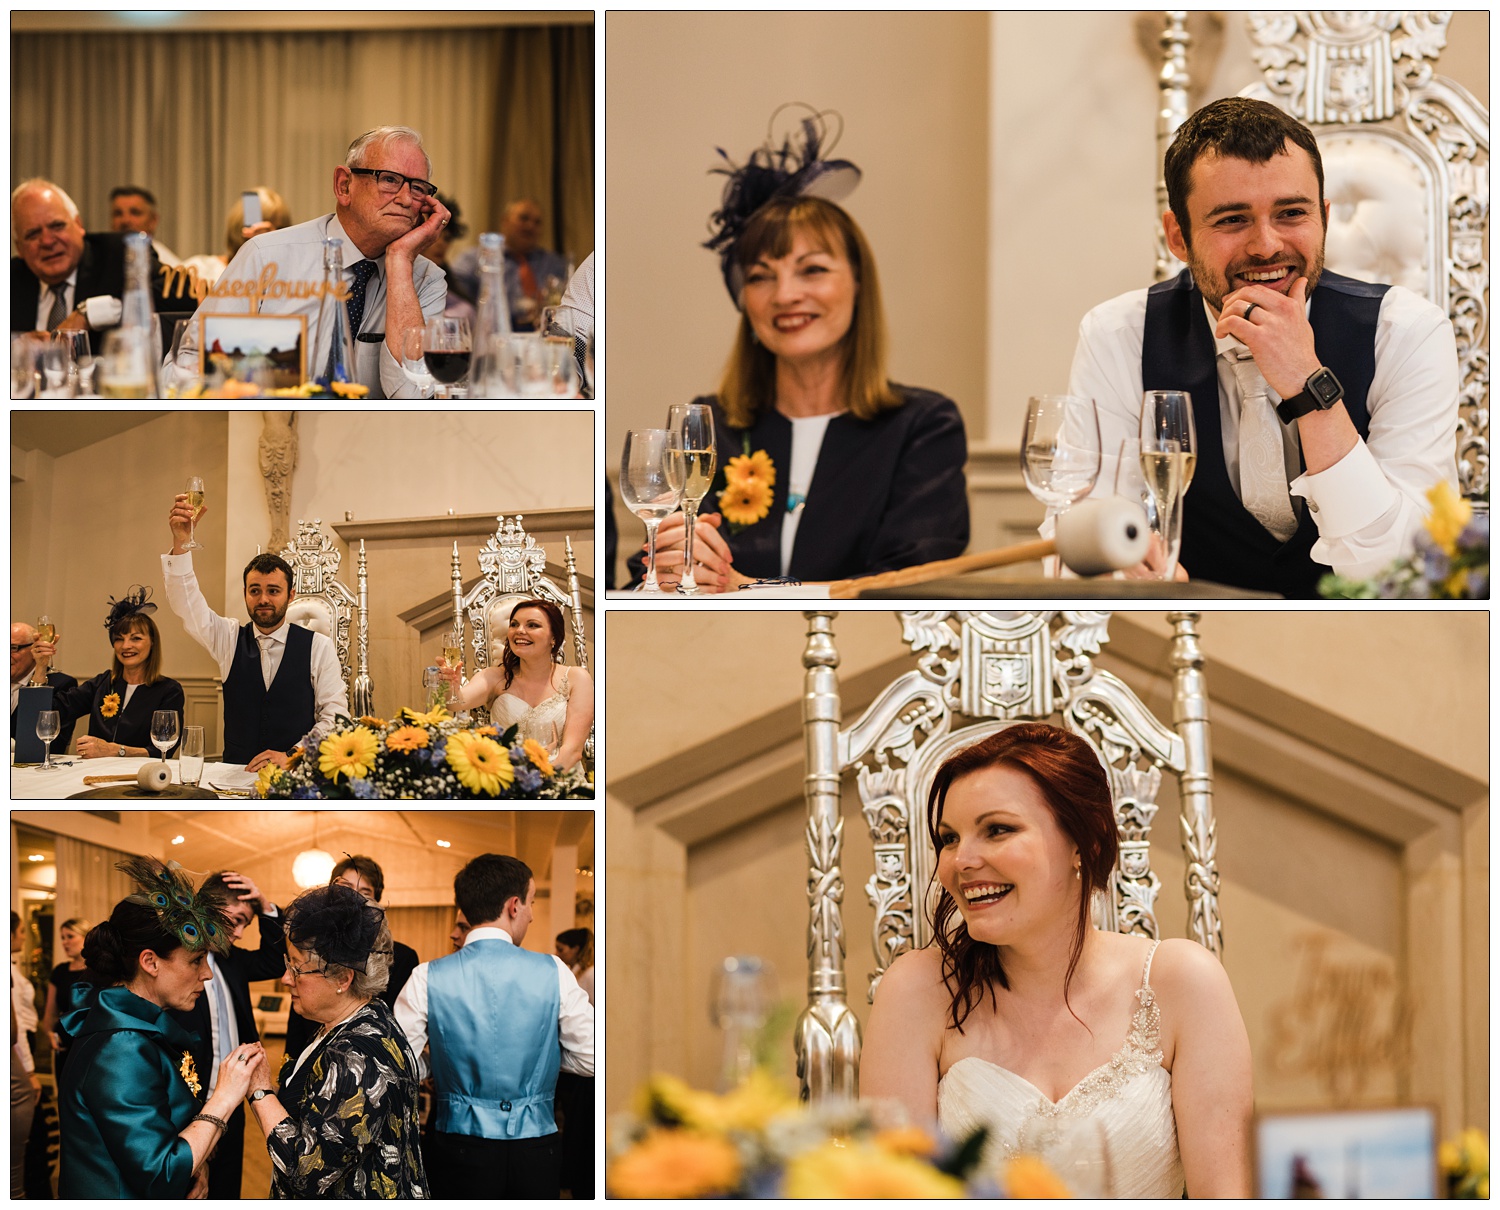 Bride and groom are laughing during wedding speeches. They are sat on ornate throne like silver chairs. The tables are decorated with yellow gerbera daisies.